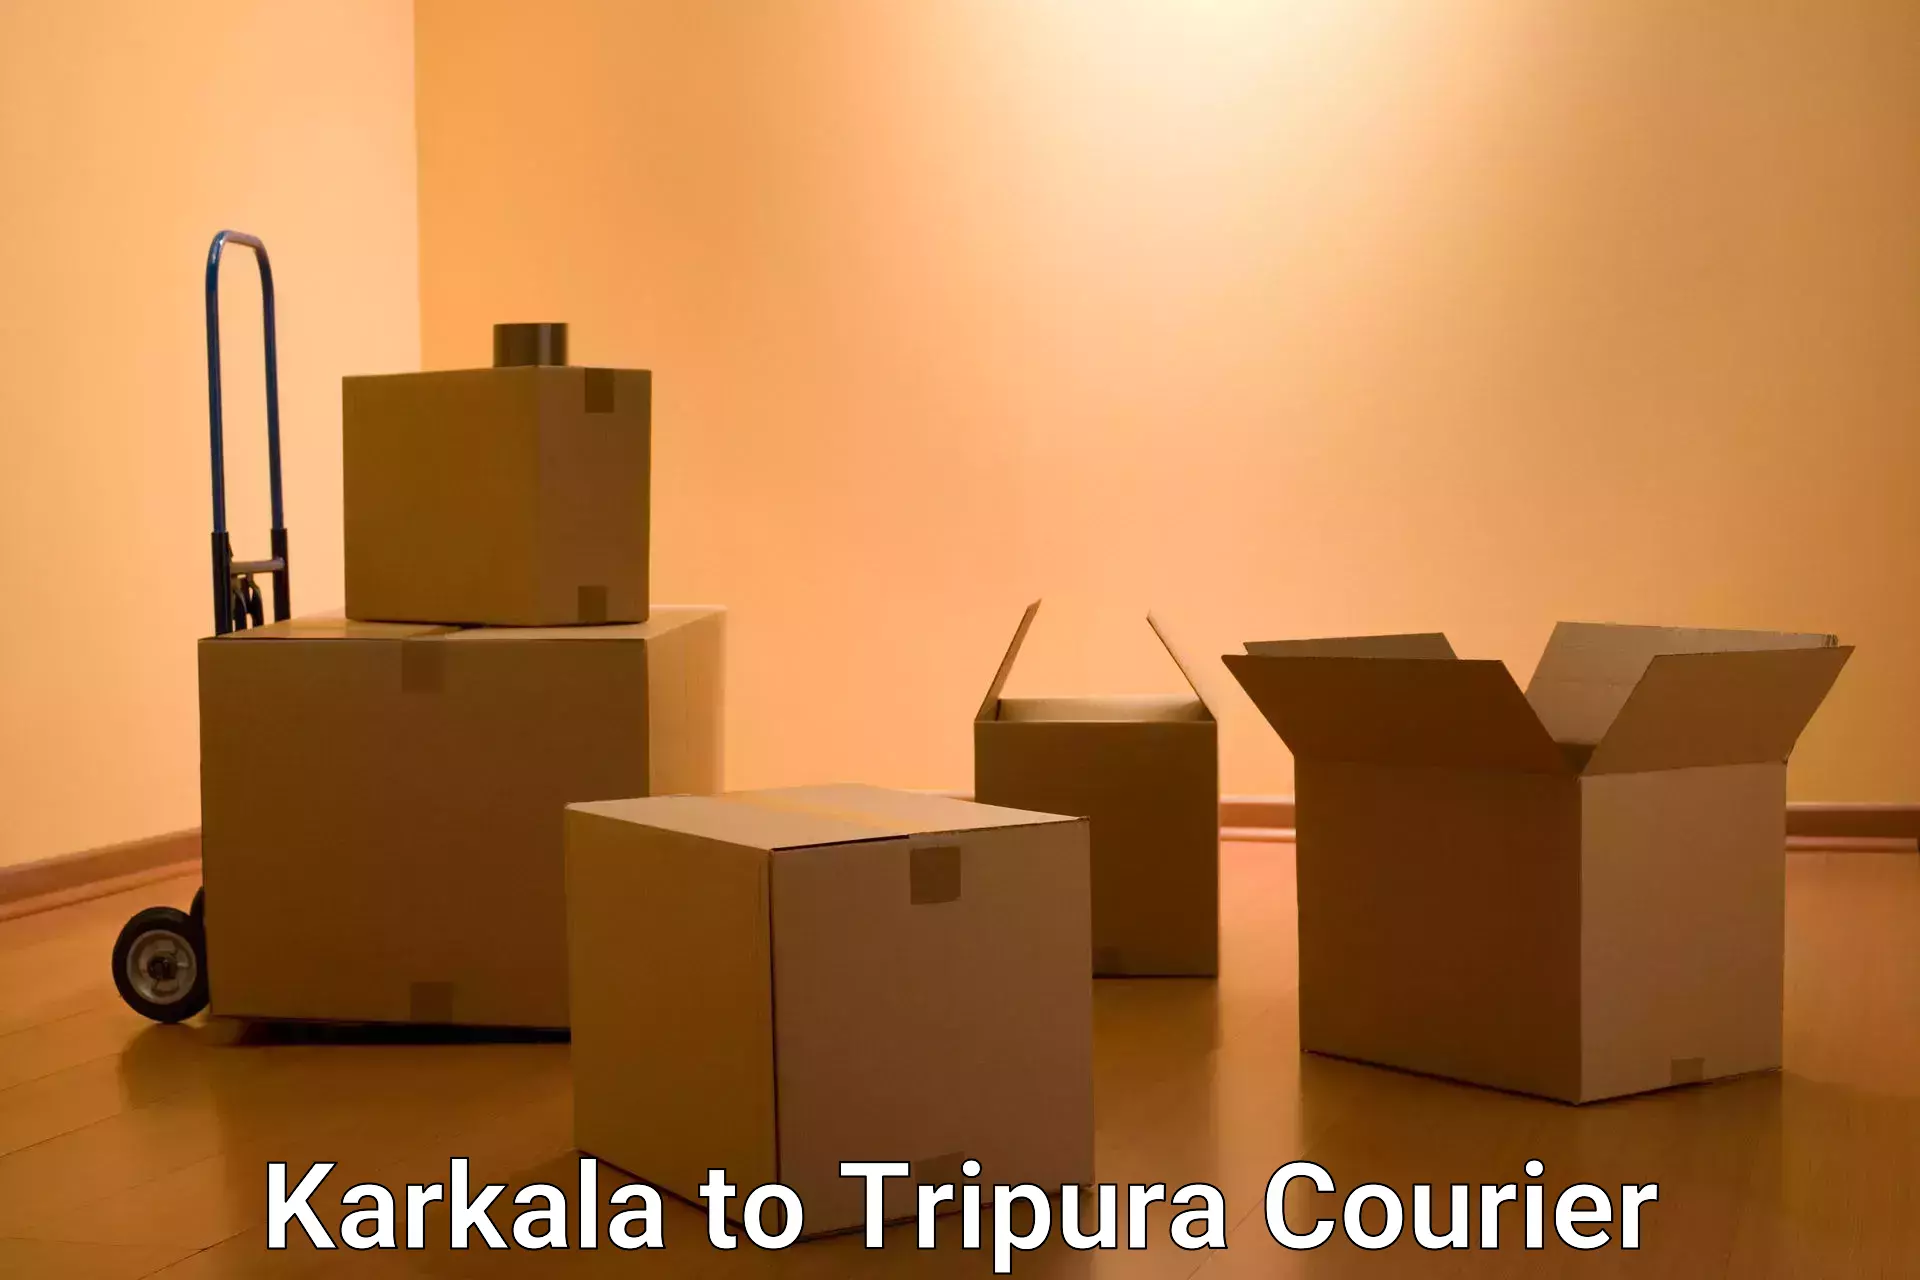 Business shipping needs in Karkala to Udaipur Tripura